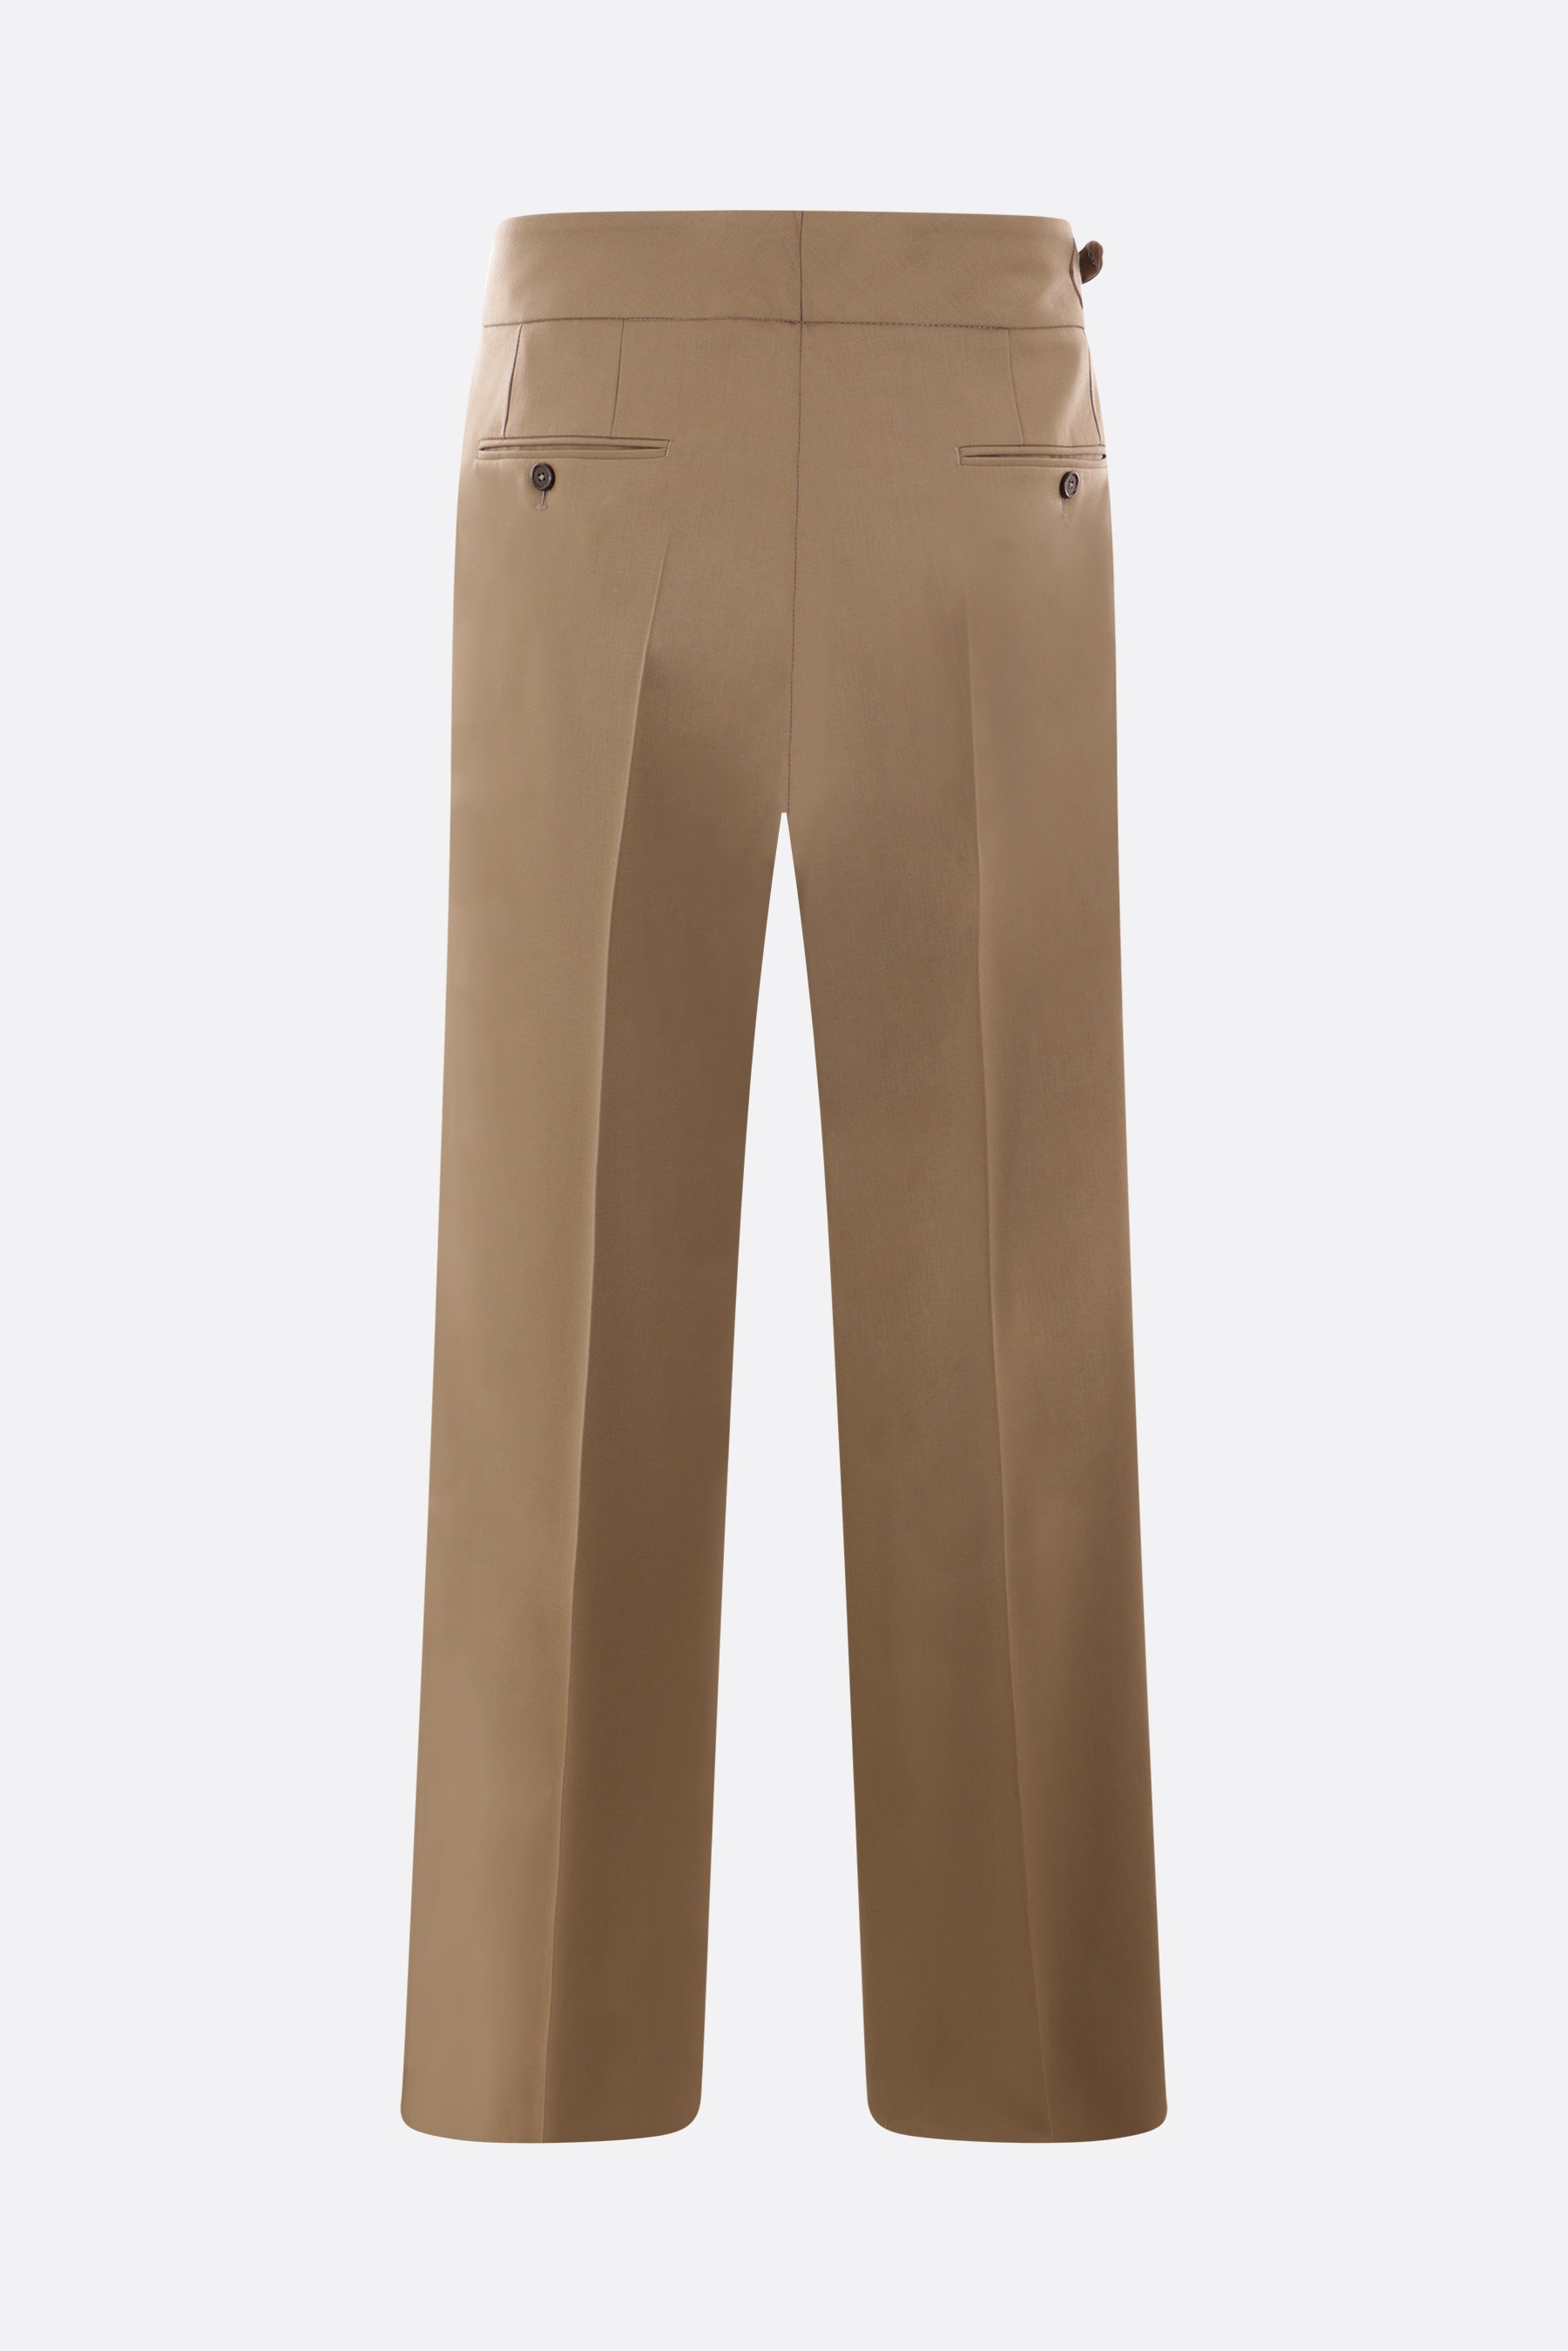 TAILORED TWO-WAY STRETCH TWILL PANTS - 2